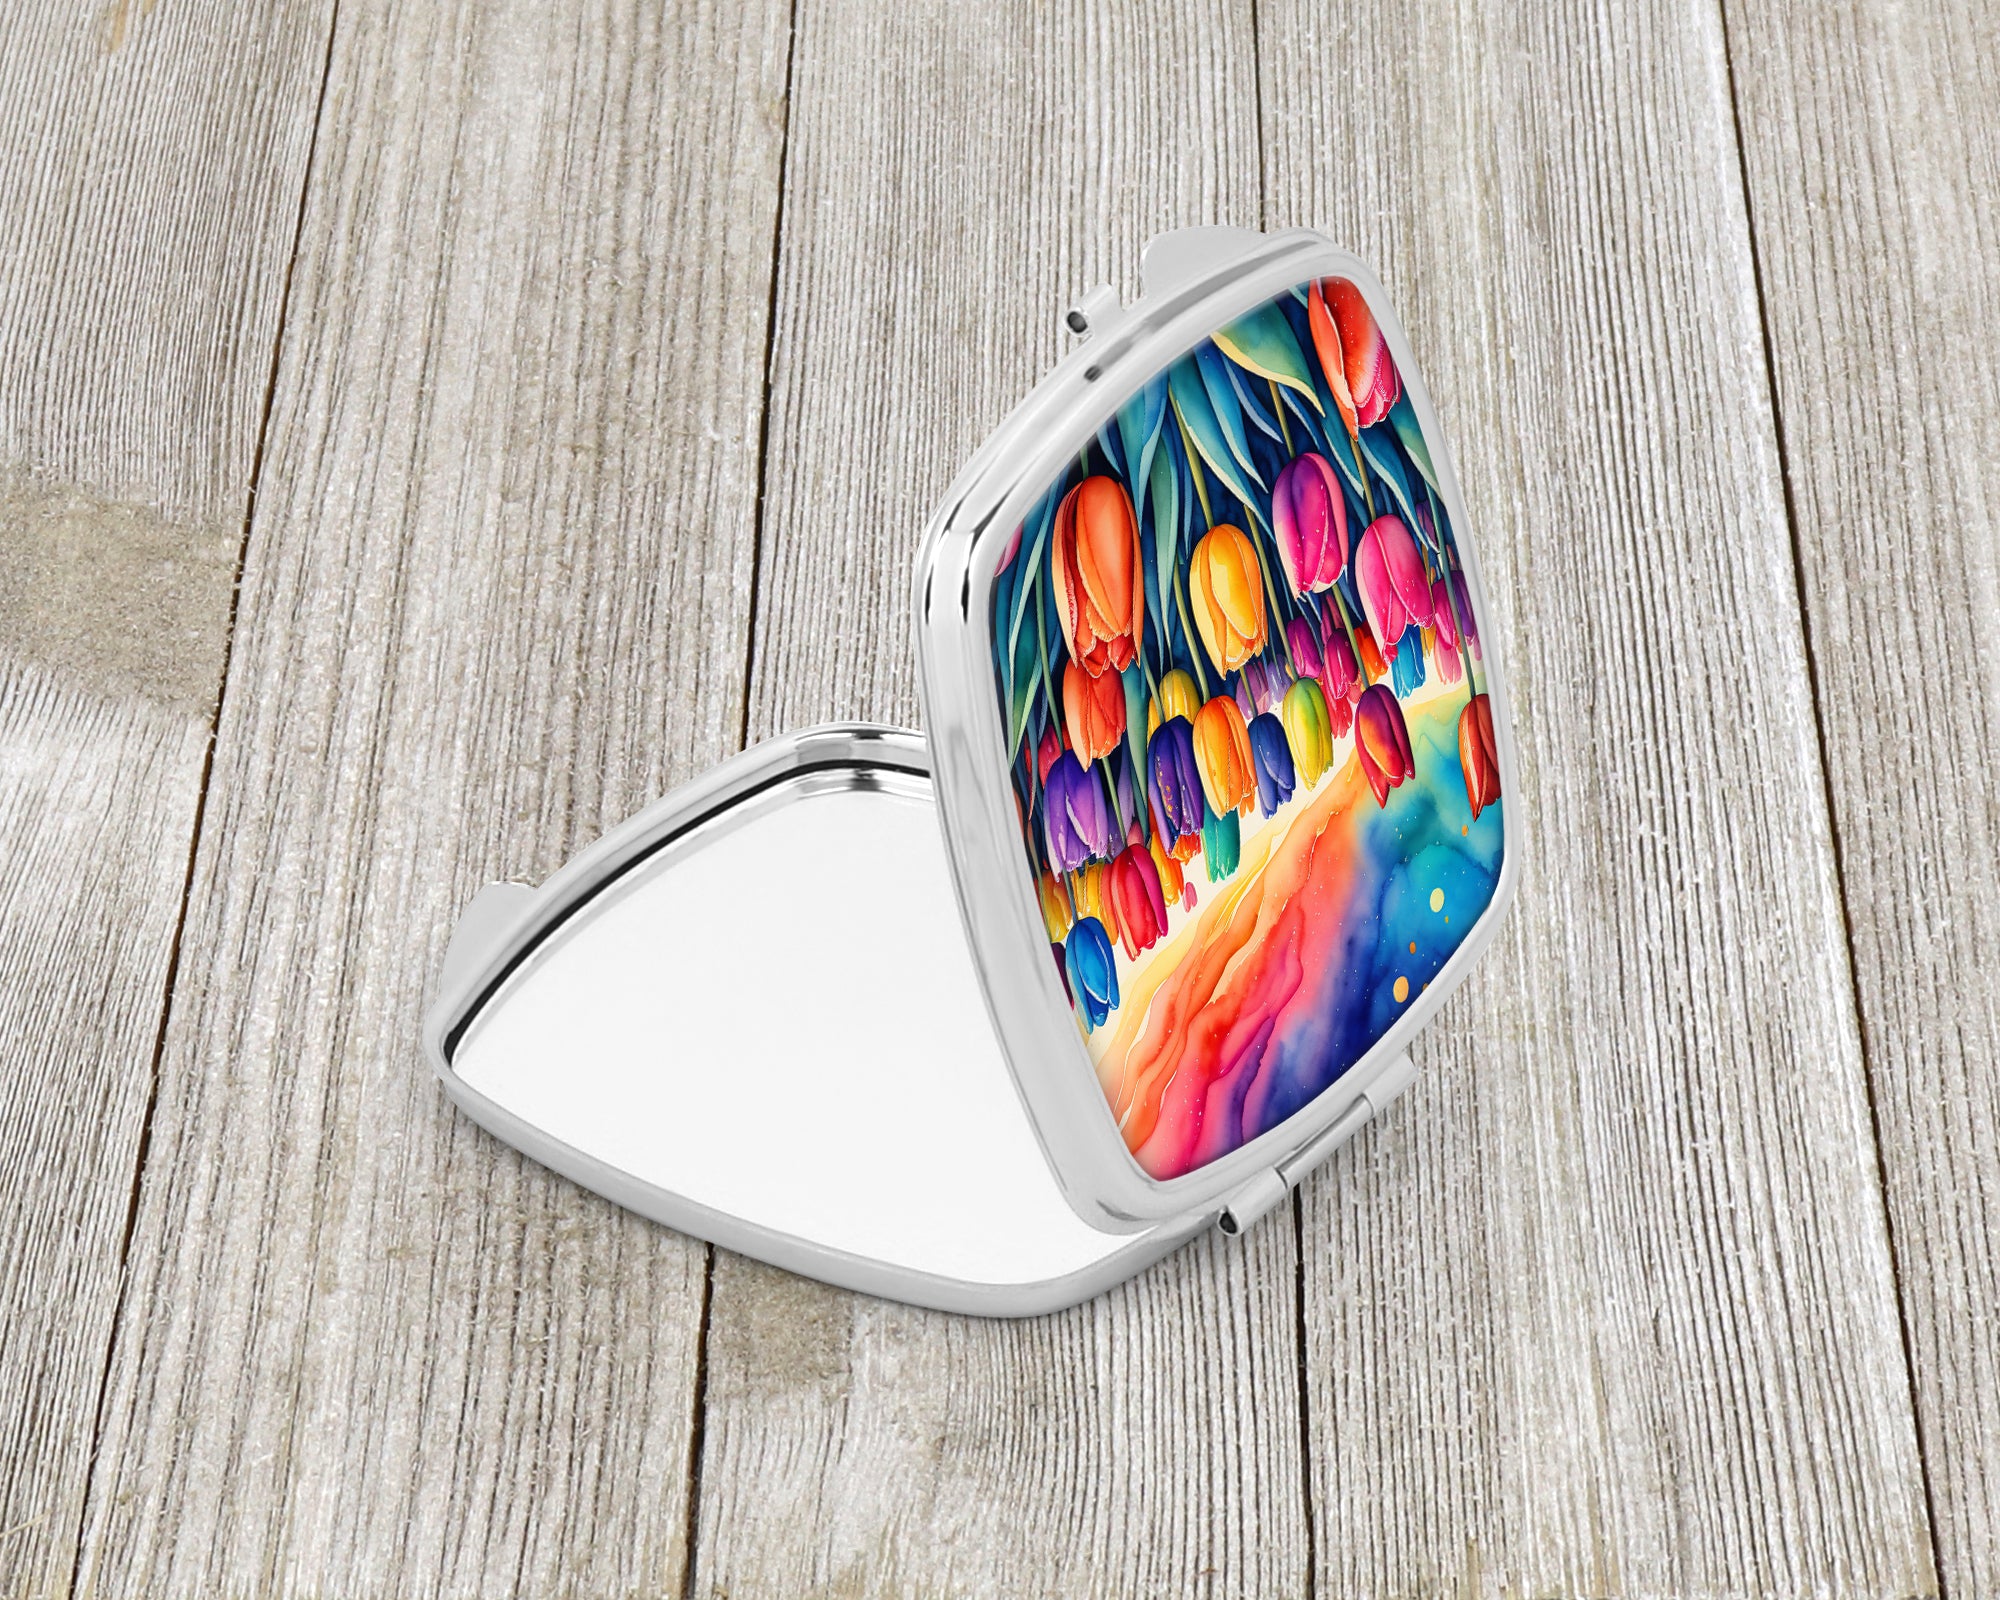 Buy this Colorful Tulips Compact Mirror